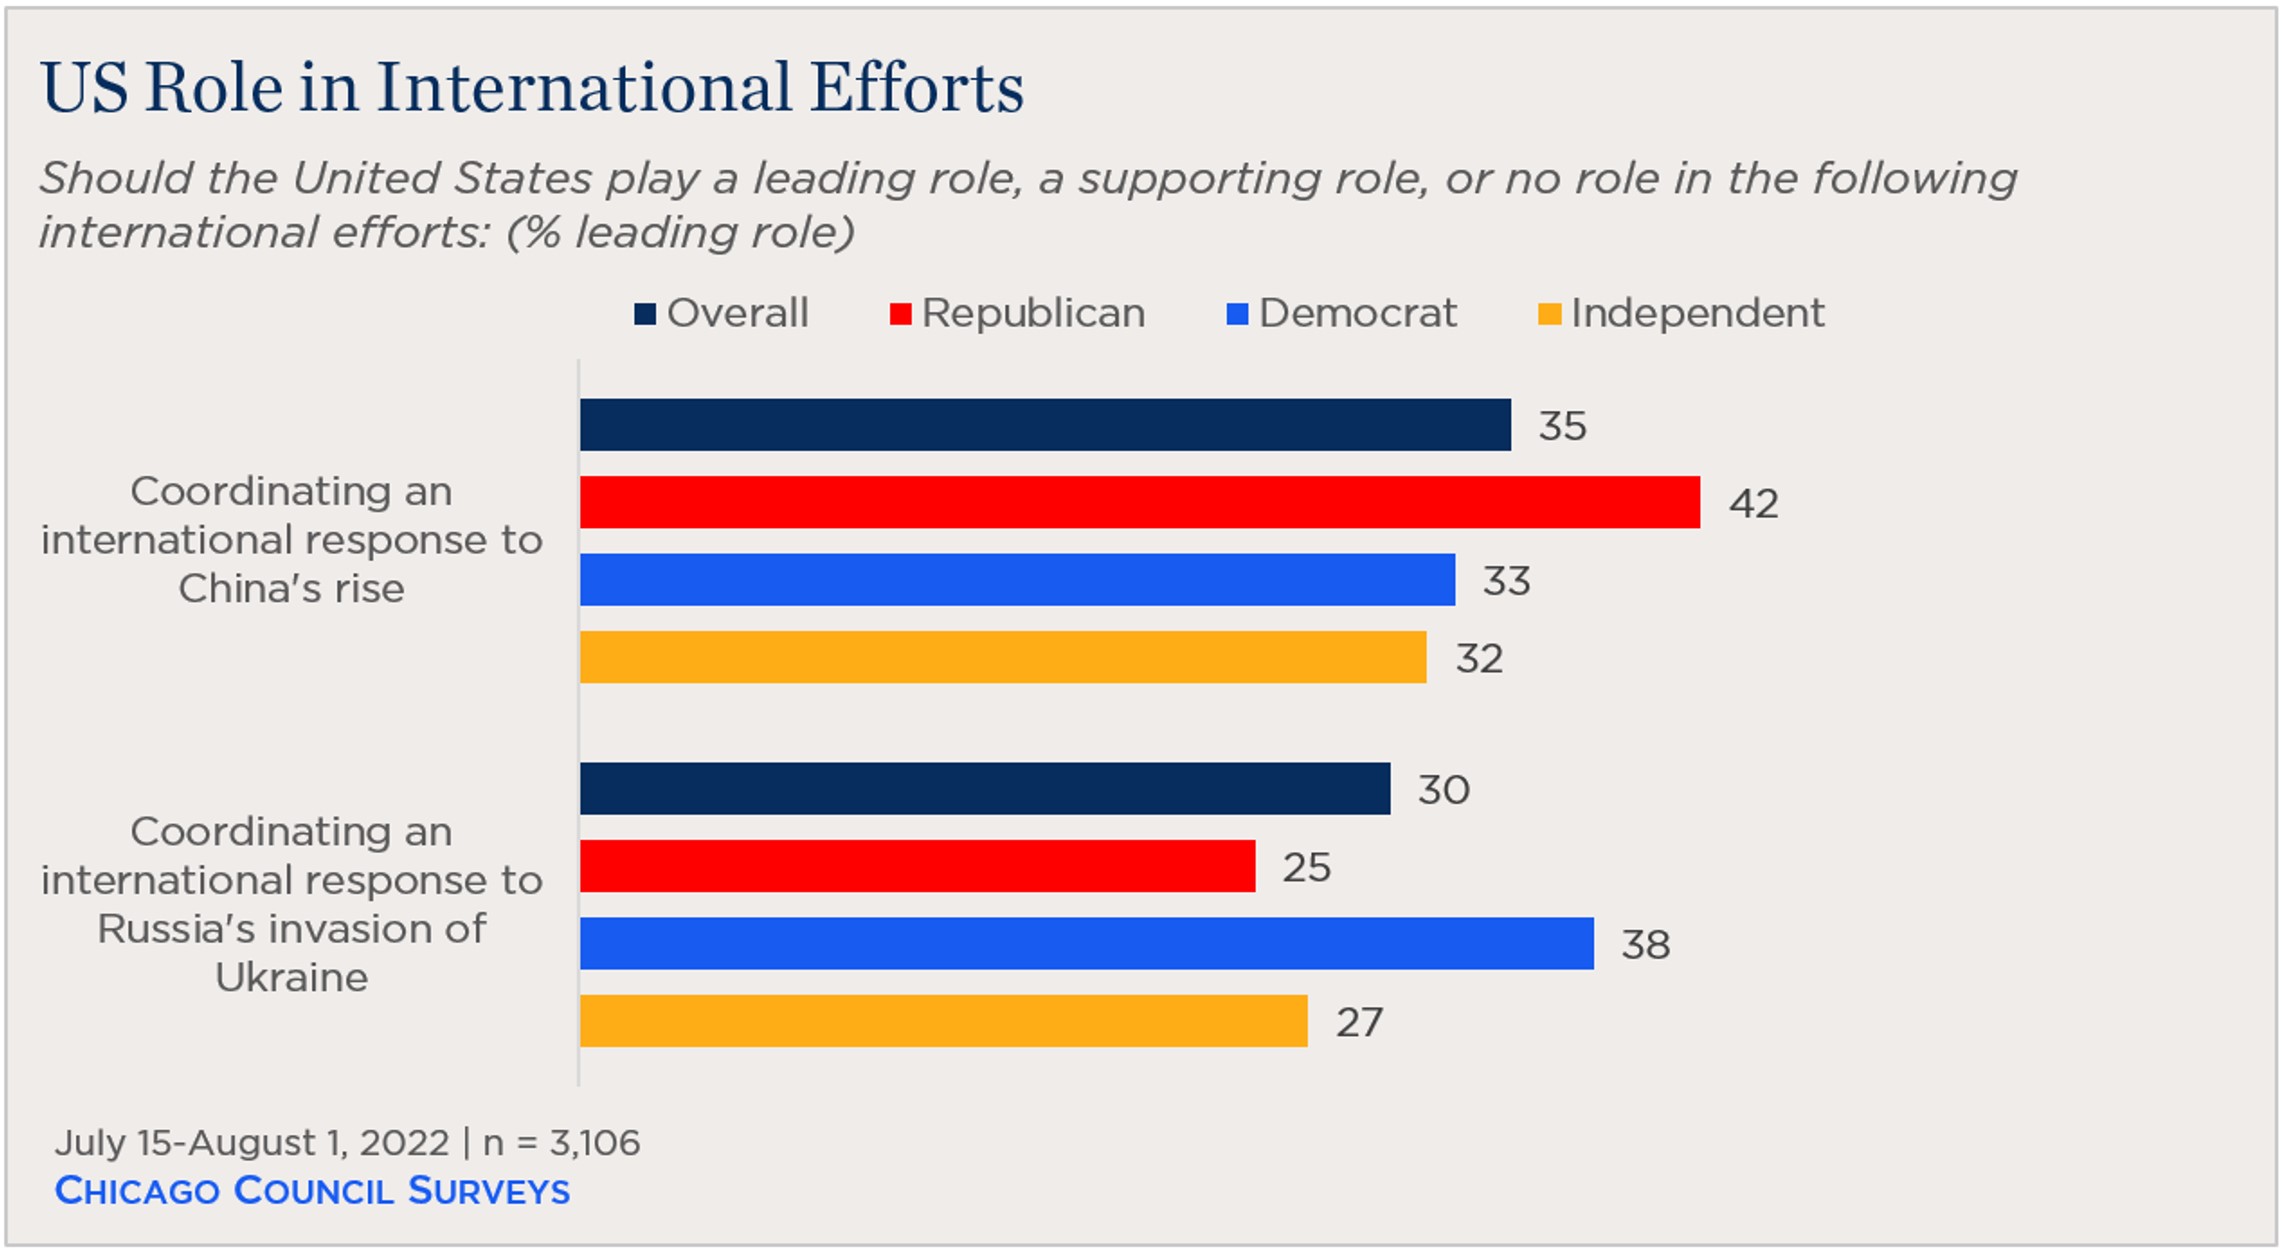 bar chart showing partisan views of US role in international efforts